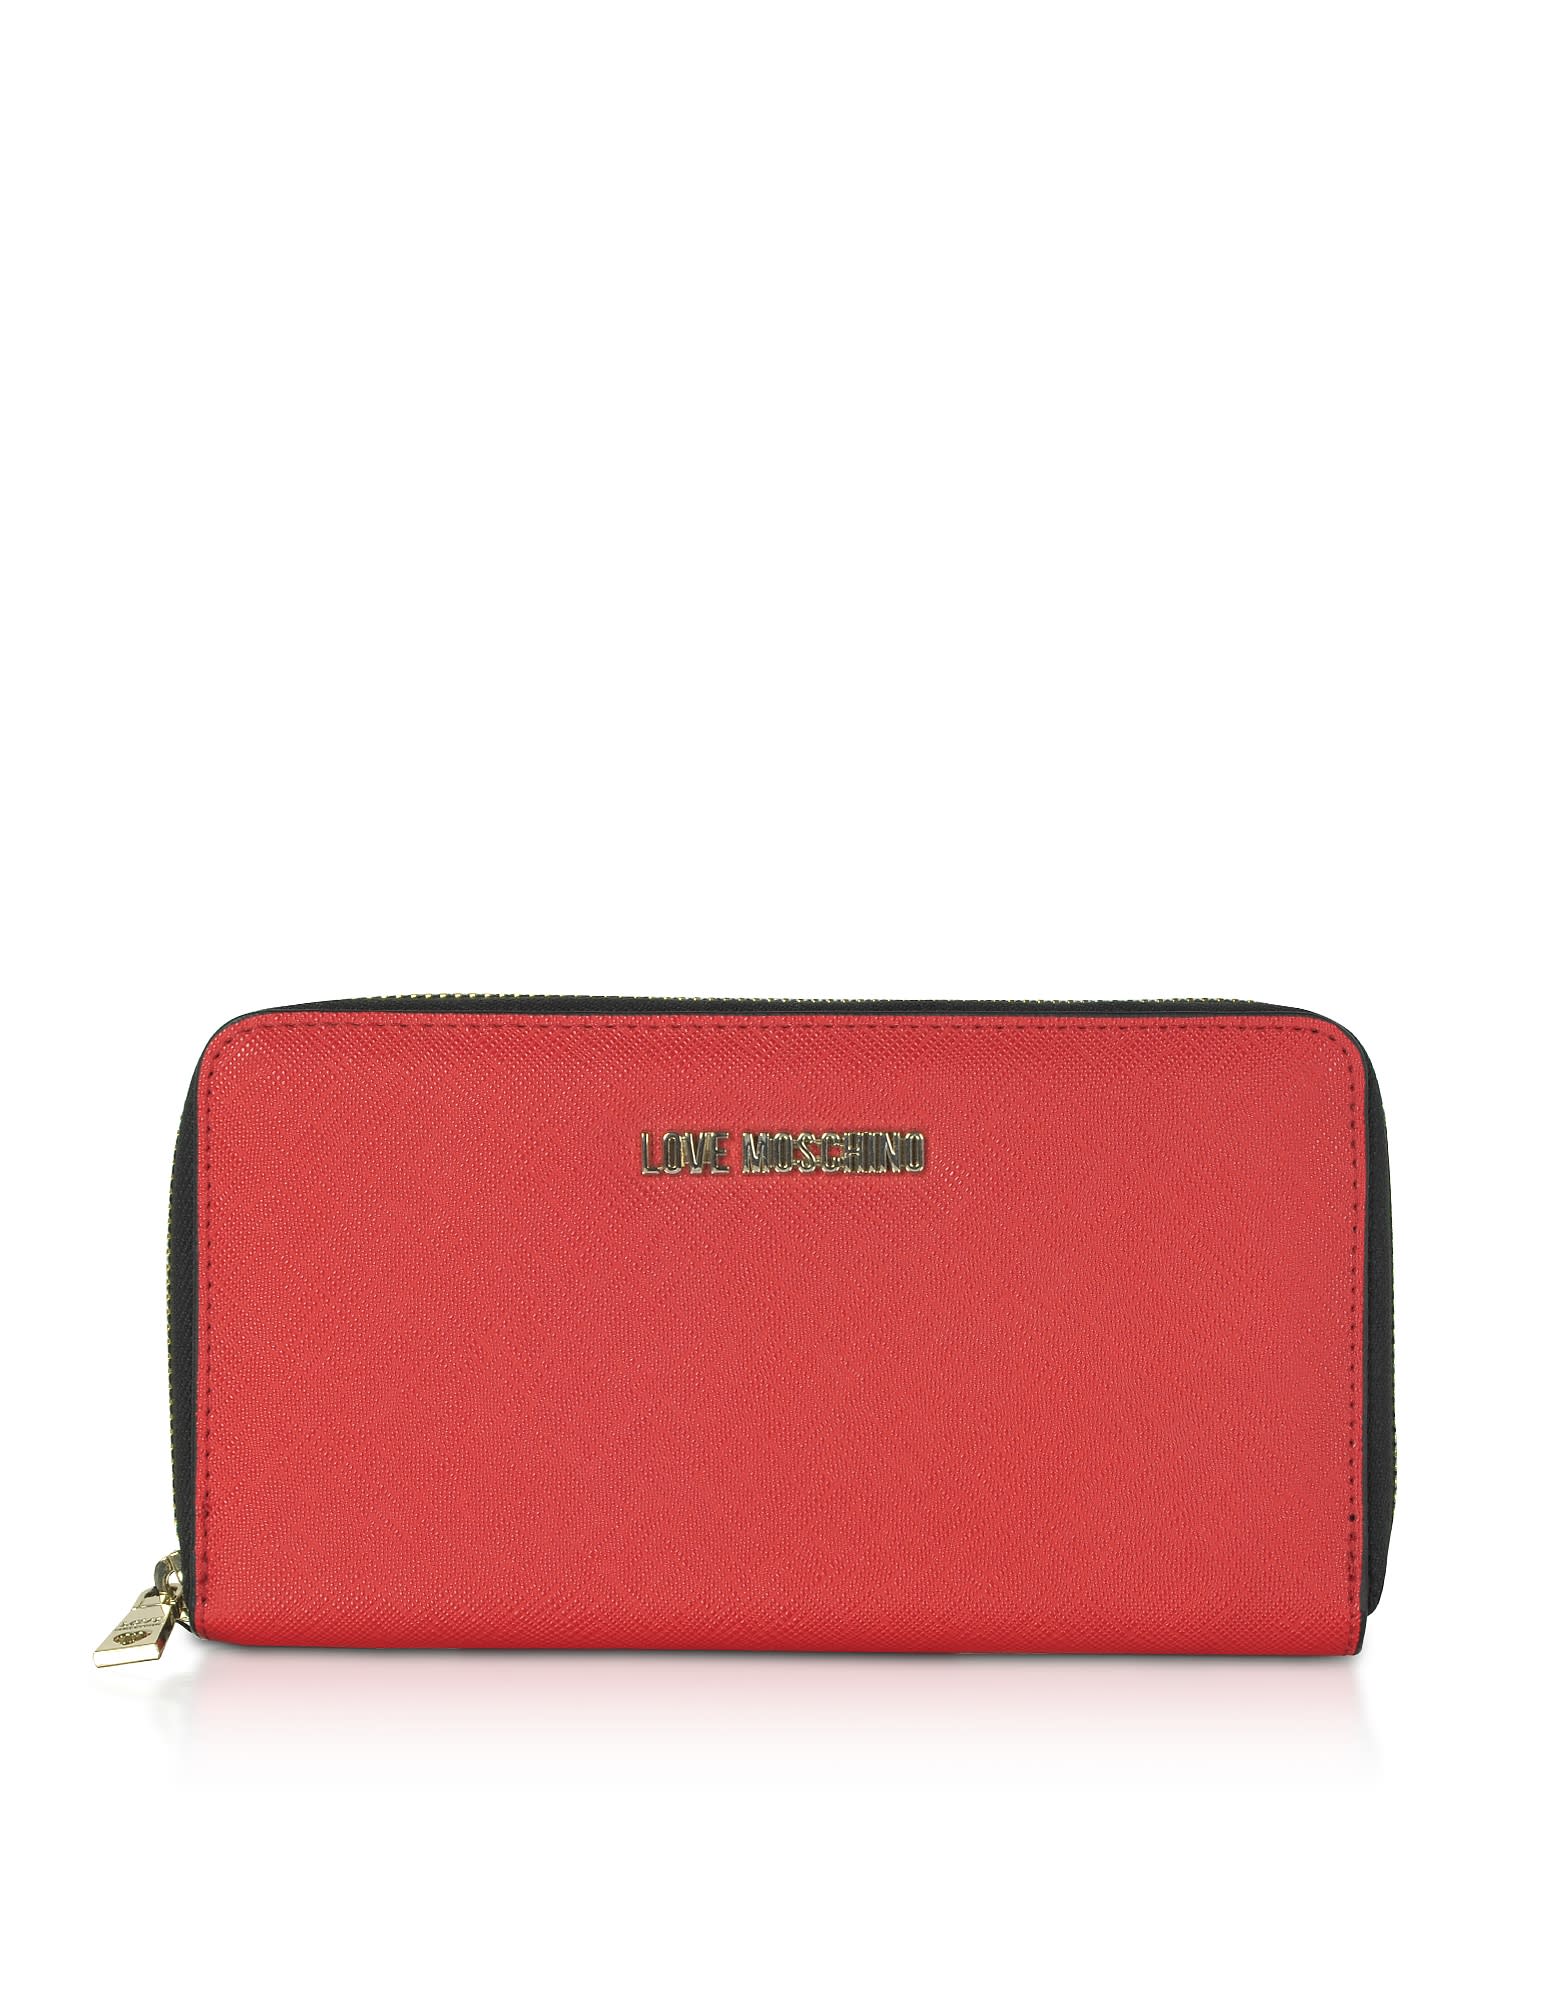 Love Moschino Red Saffiano Eco-leather Zip-around Womens Wallet